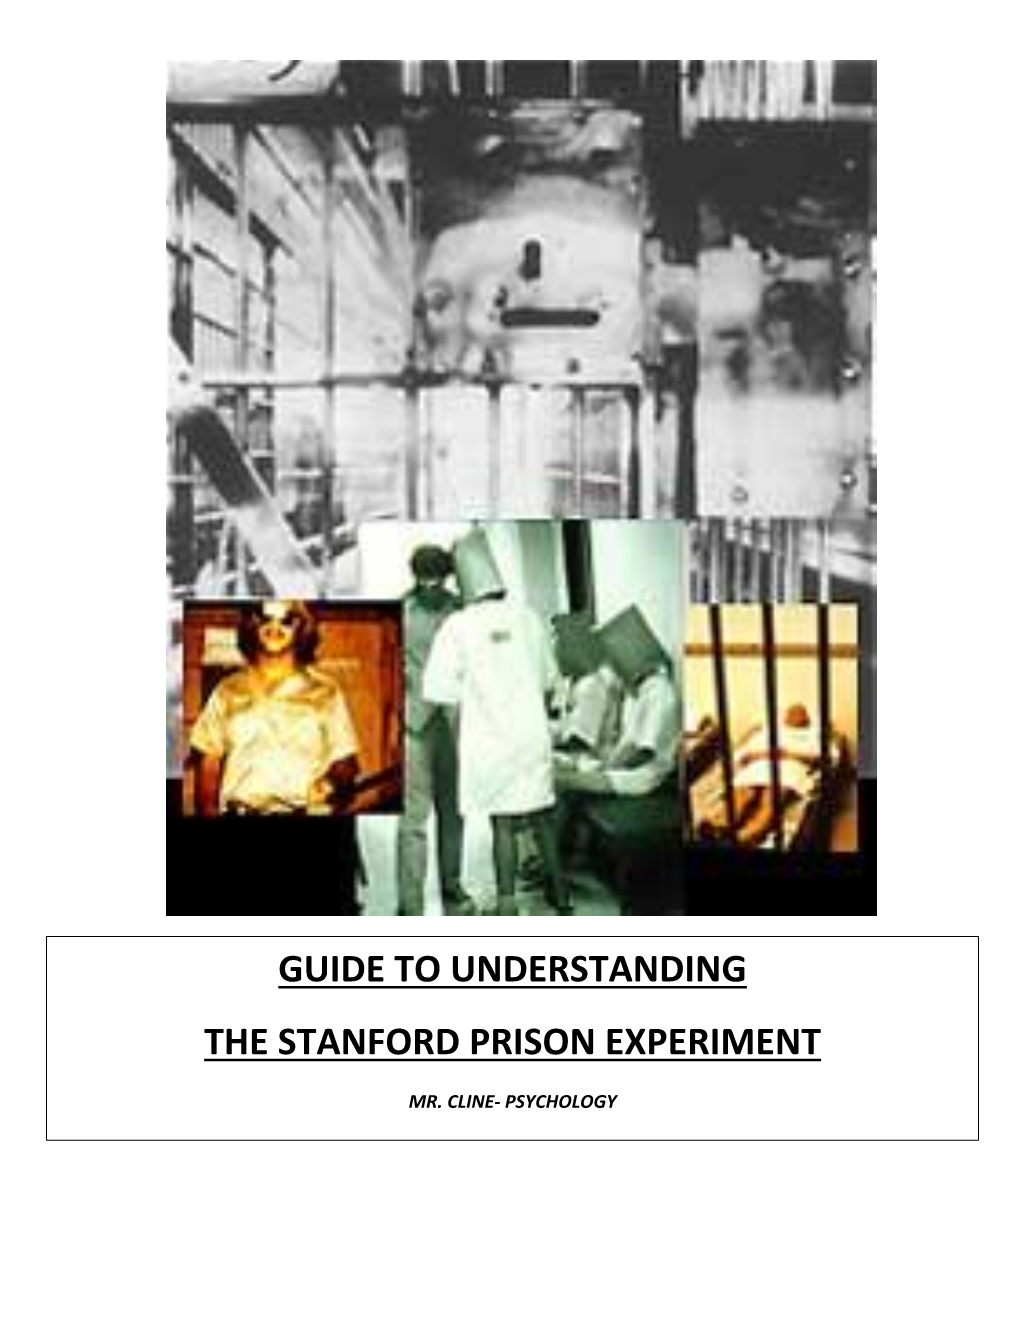 Guide to Understanding the Stanford Prison Experiment